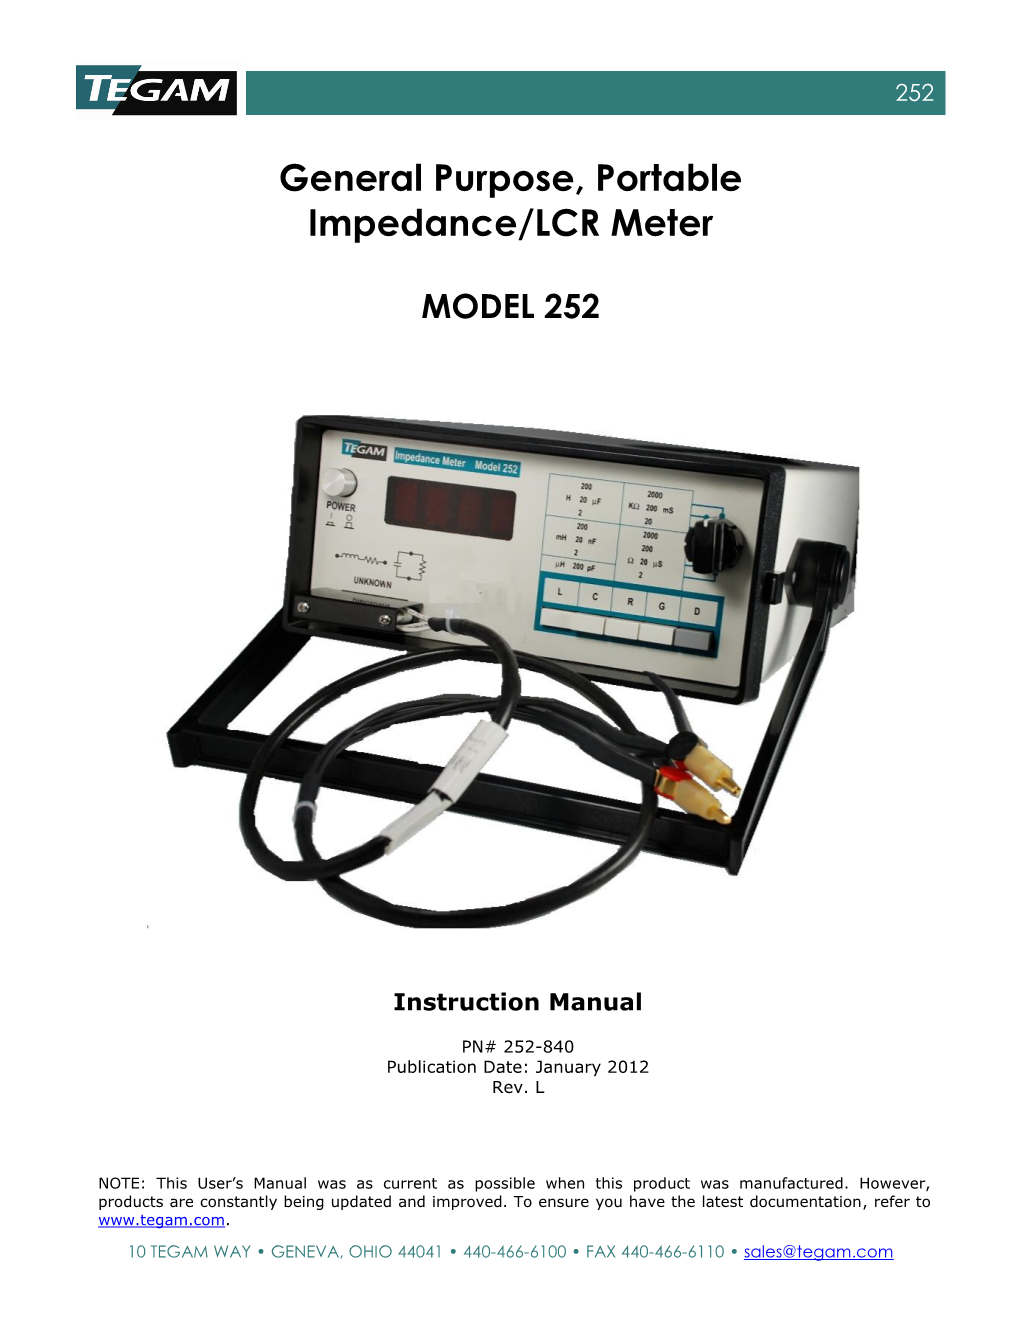 General Purpose, Portable Impedance/LCR Meter